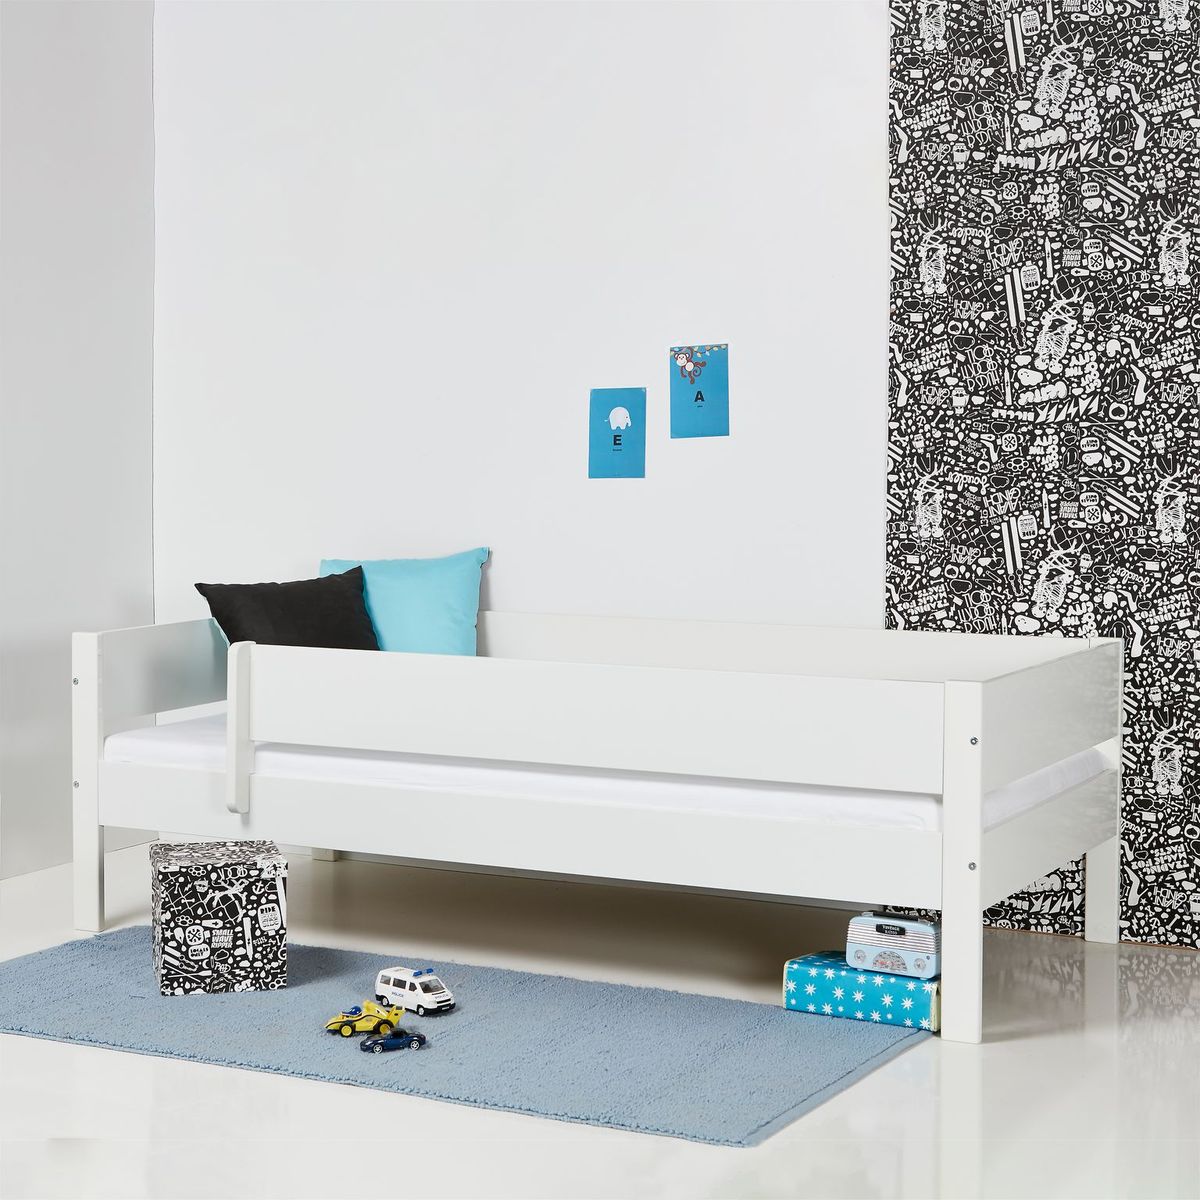 Huxie White Day Bed With Safety Rail In White